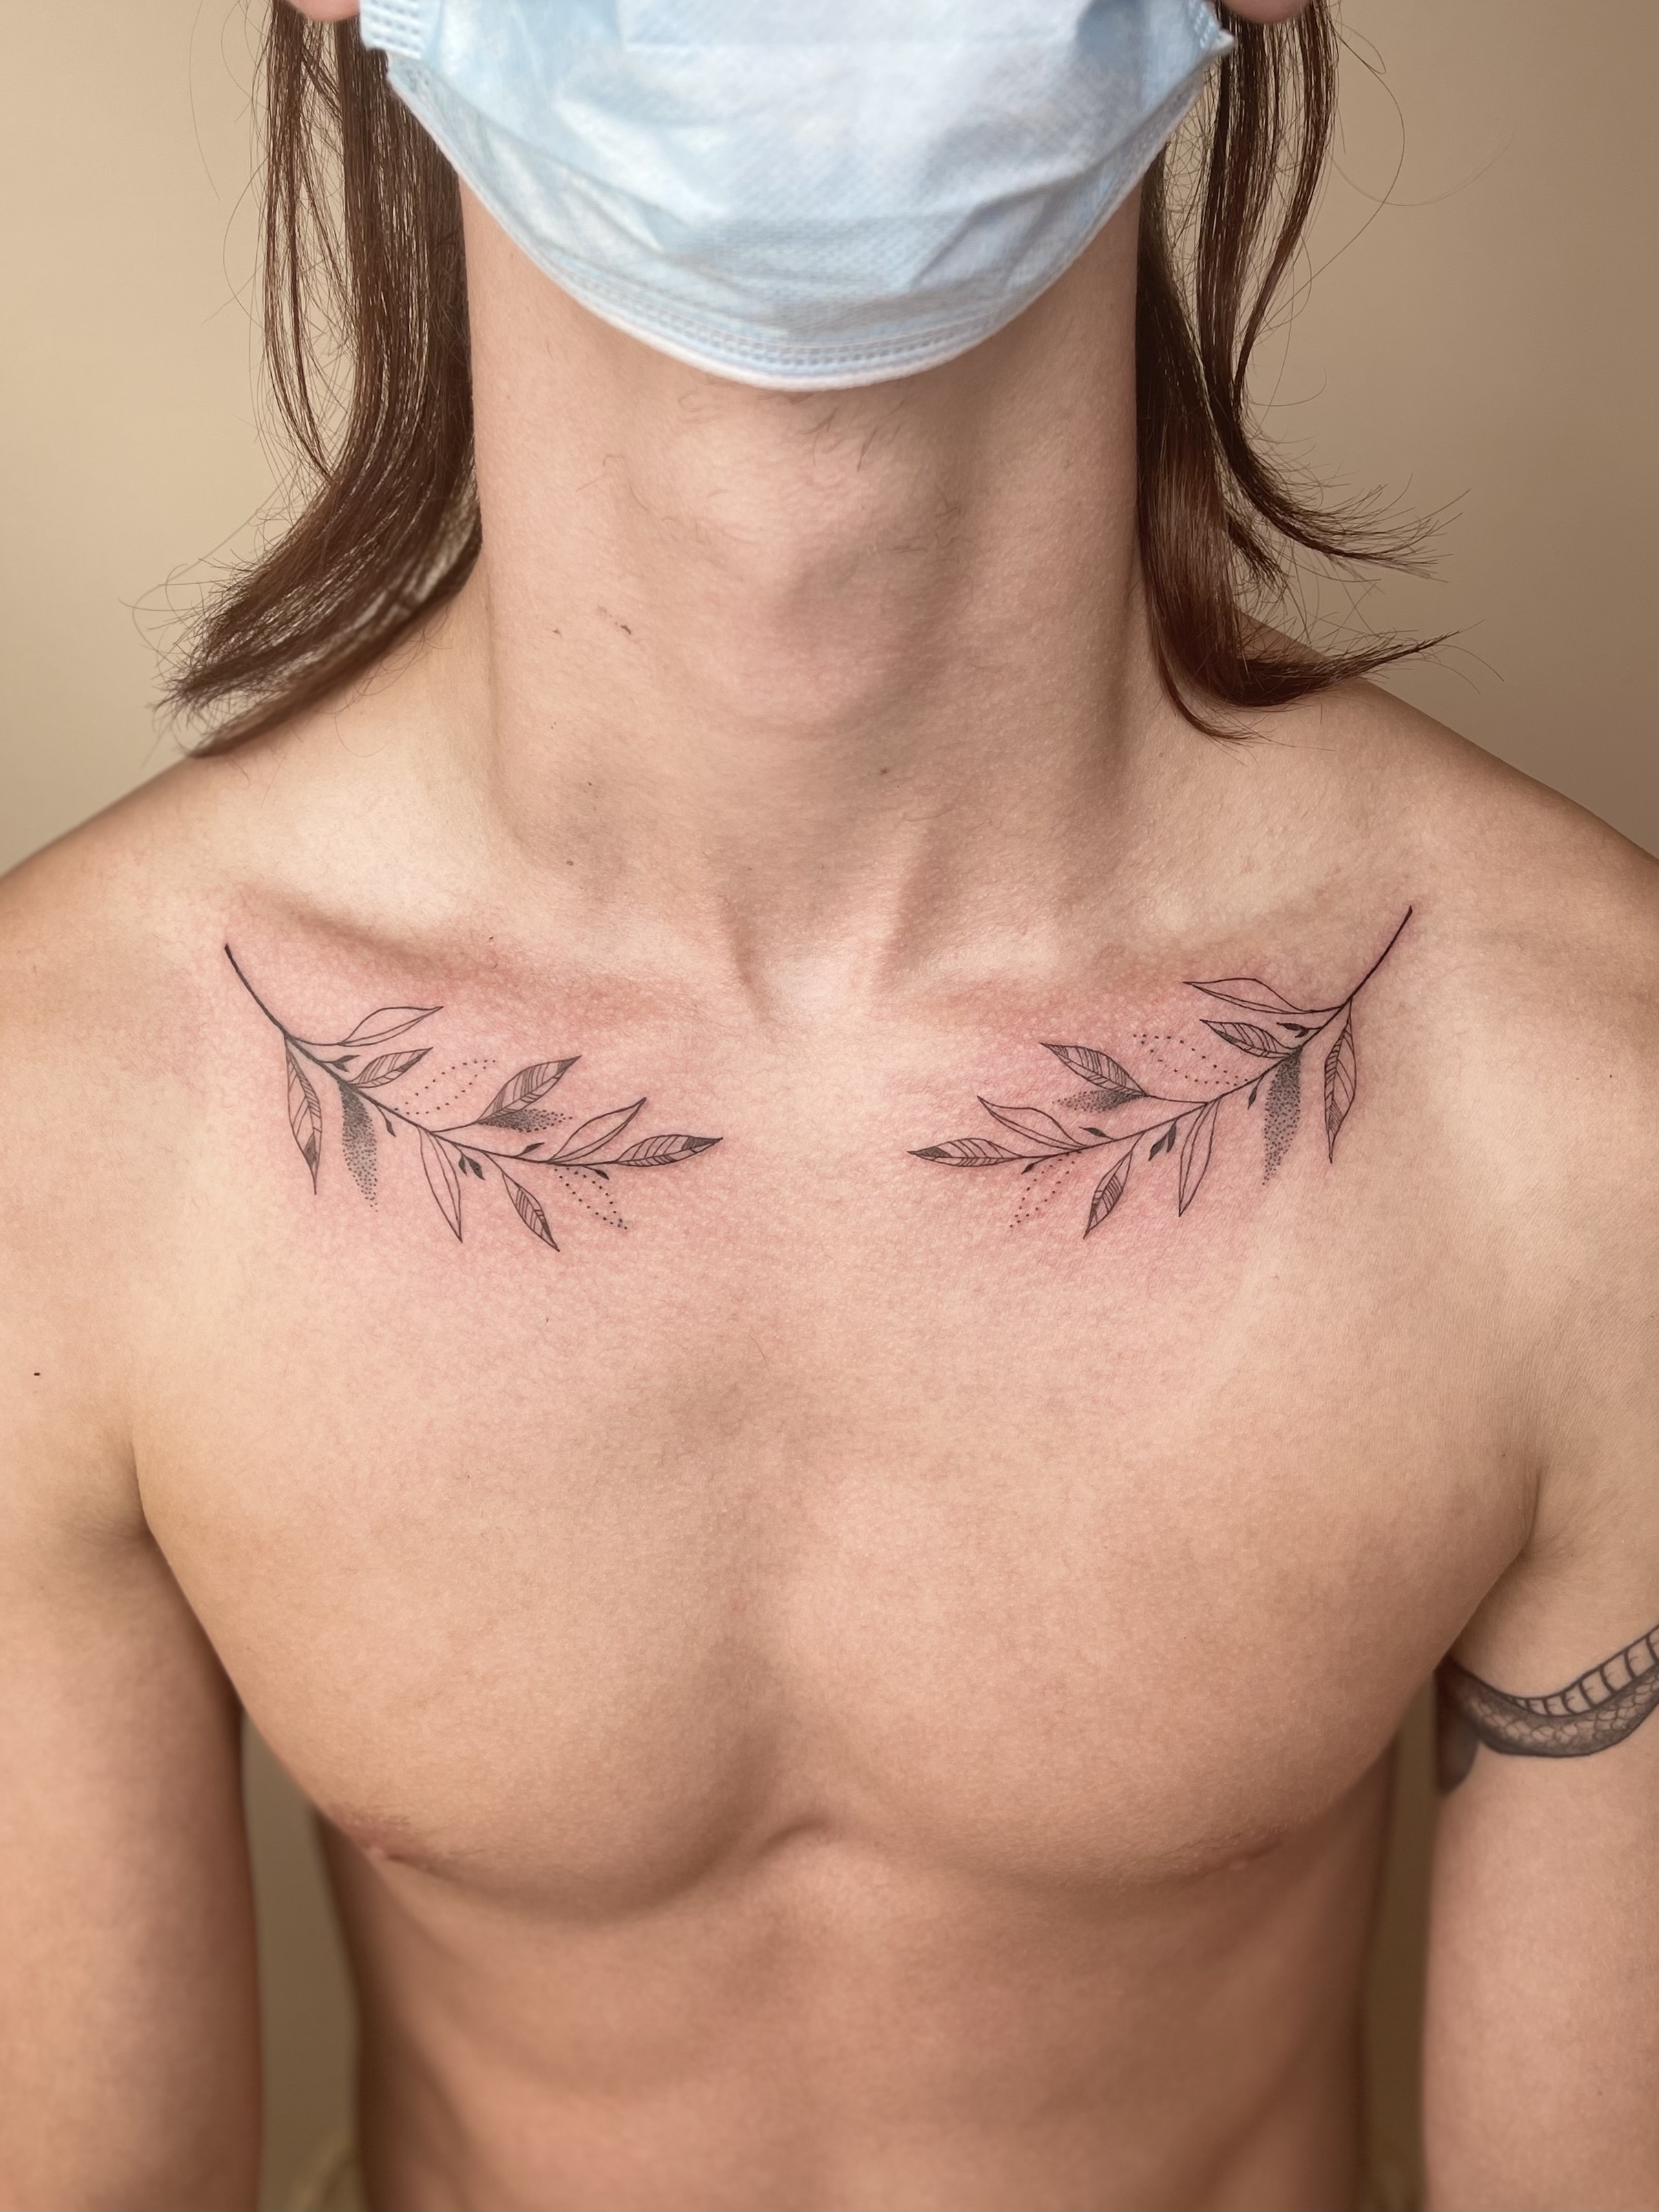 40 Best Tattoo Ideas for Men | Man of Many